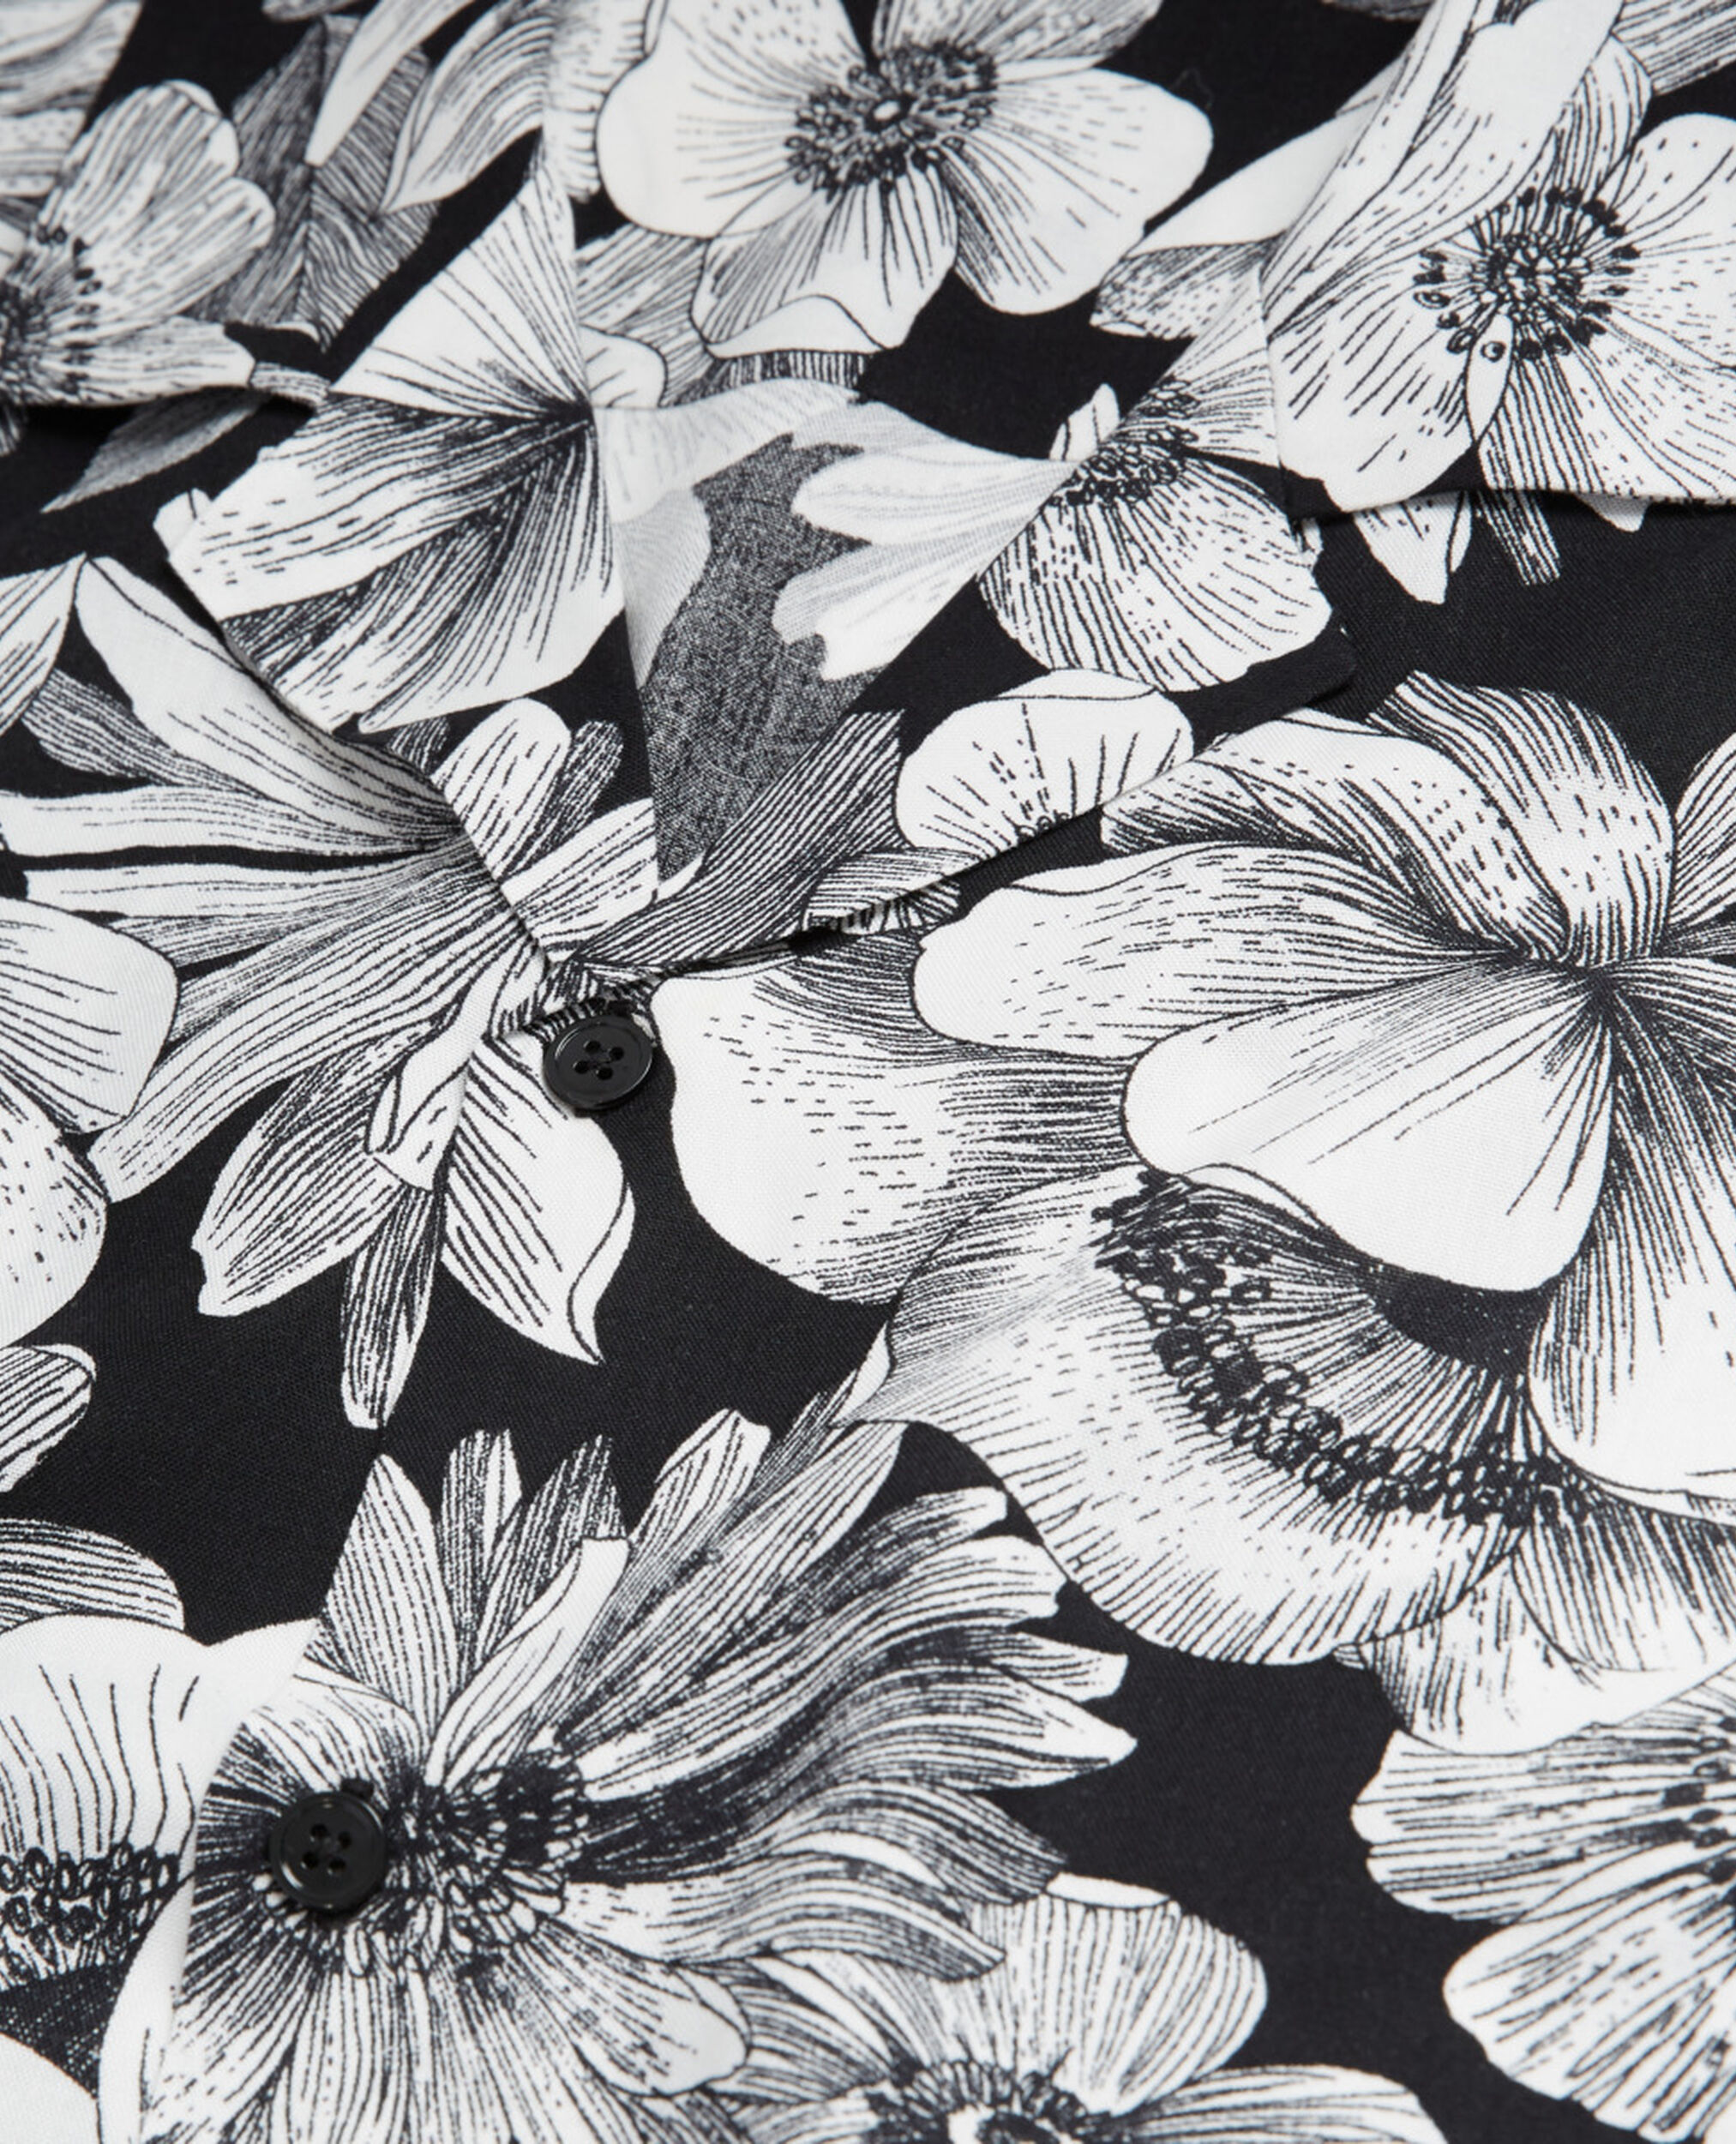 Camisa floral con cuello hawaiano, BLACK WHITE, hi-res image number null